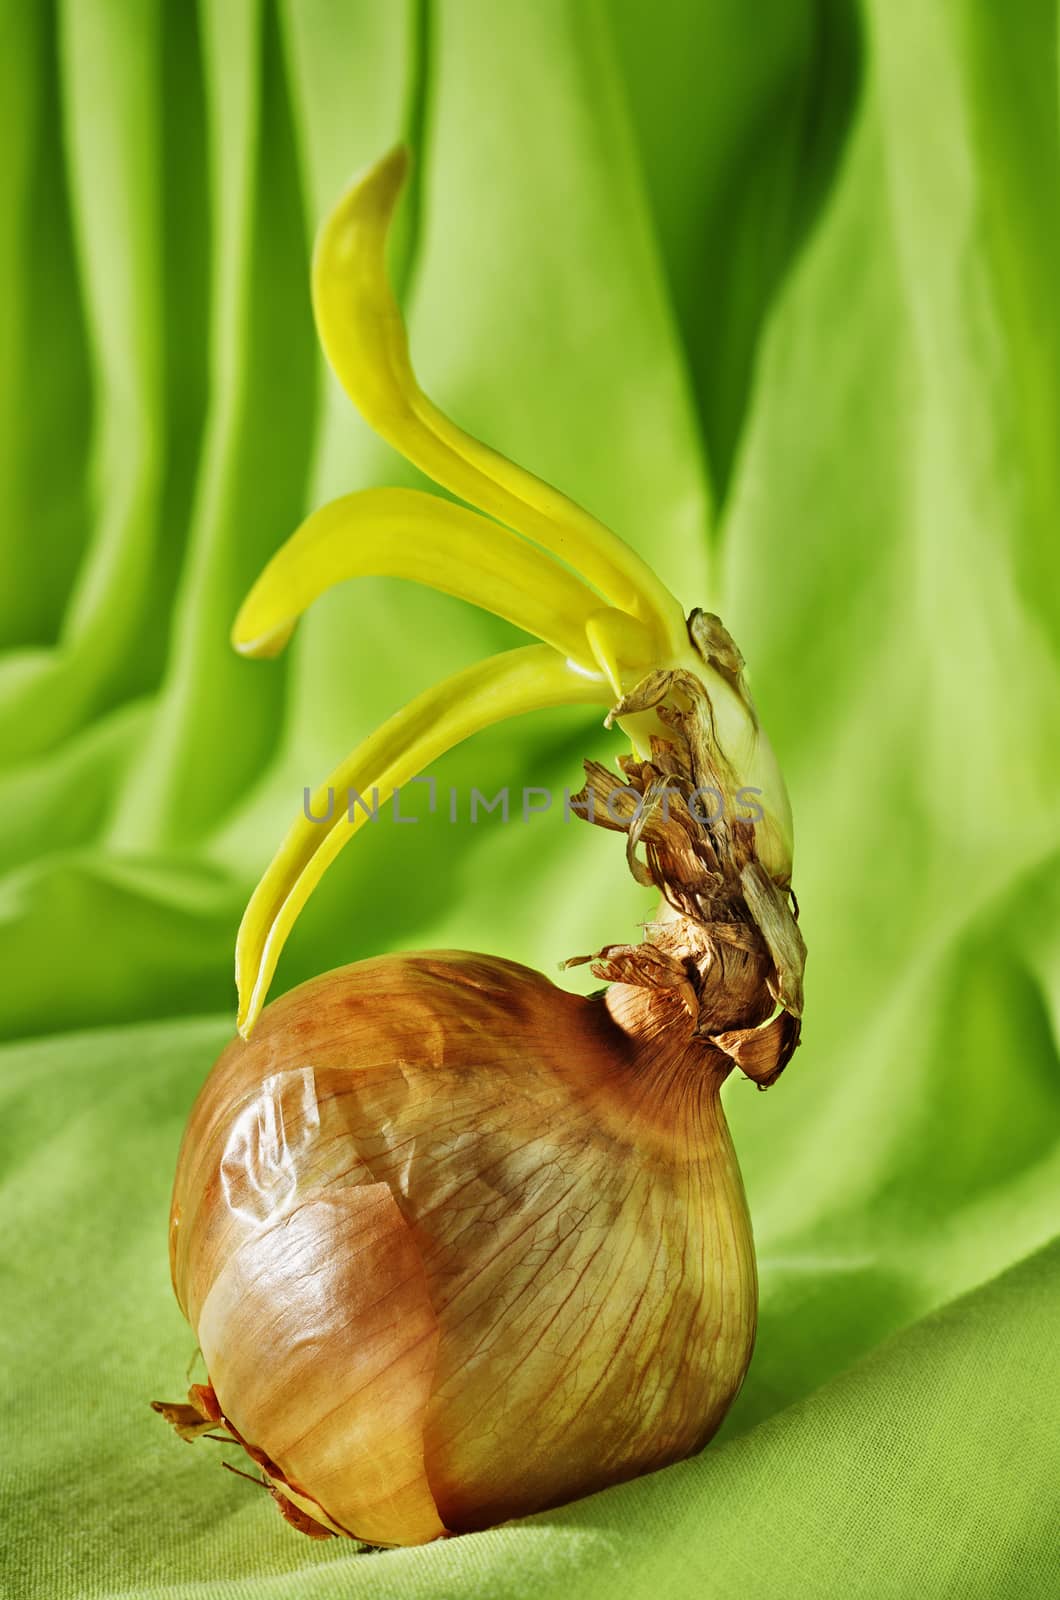 Brown sprouted onion on green background ,whole common onion with beautiful green sprout